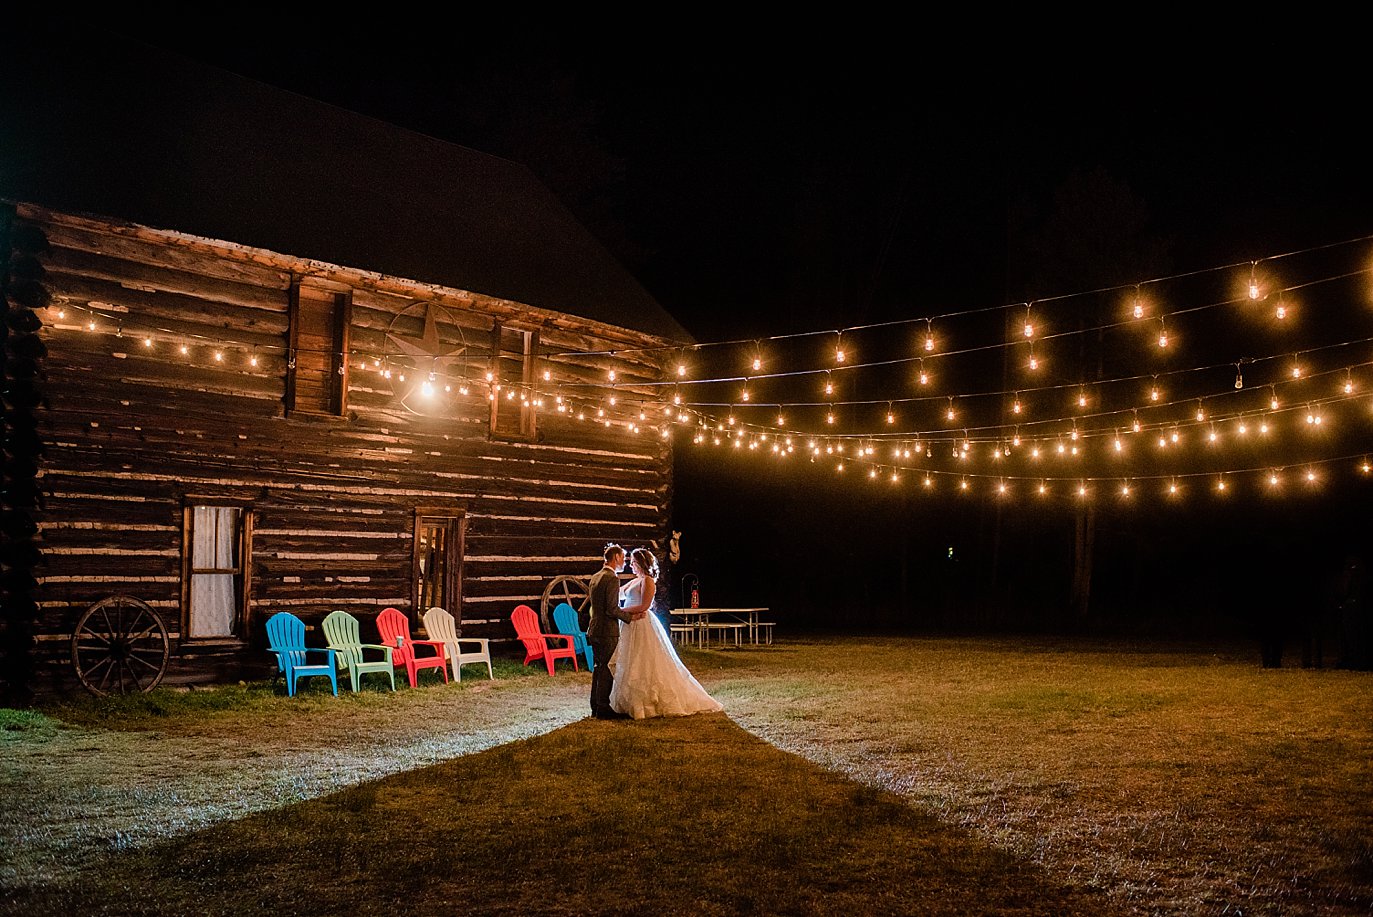 bride and groom night portrait under barn market lights at B Lazy 2 Ranch by Winter Park wedding photographer Jennie Crate